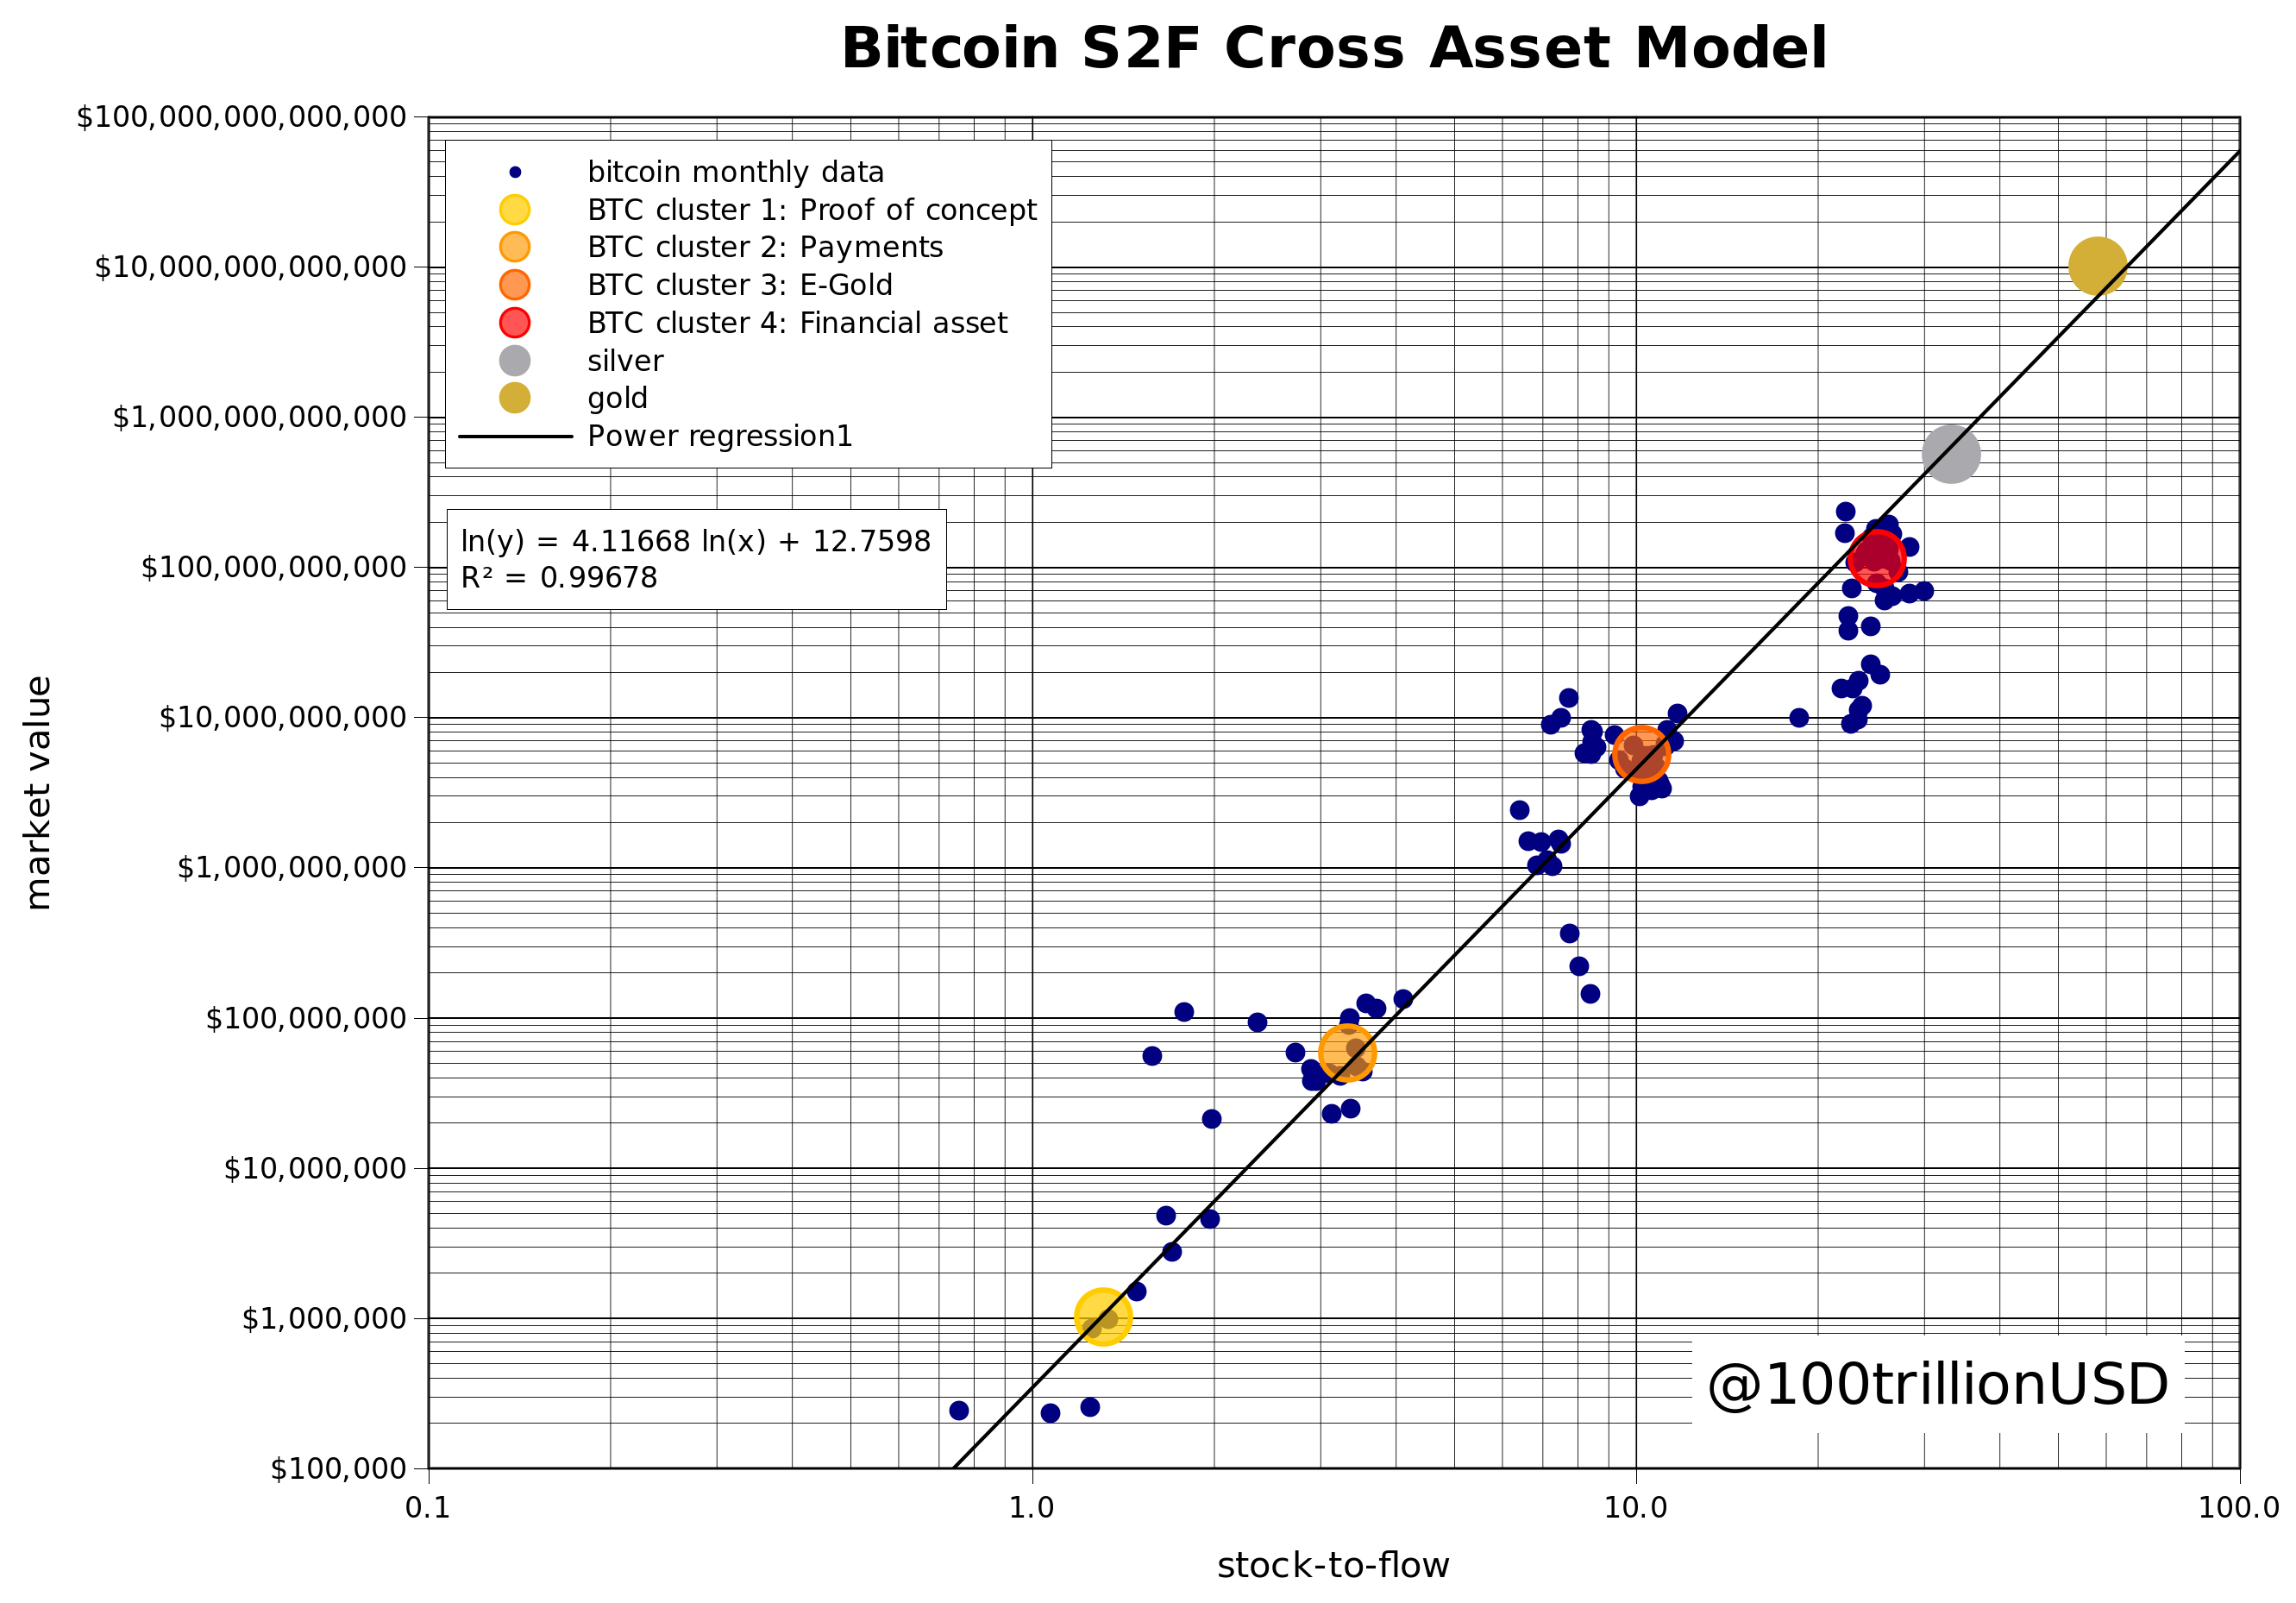 Image of a new iteration of the Stock to Flow Model from analyst PlanB. It predicts Bitcoin will reach $288,000 or so in the next era. 